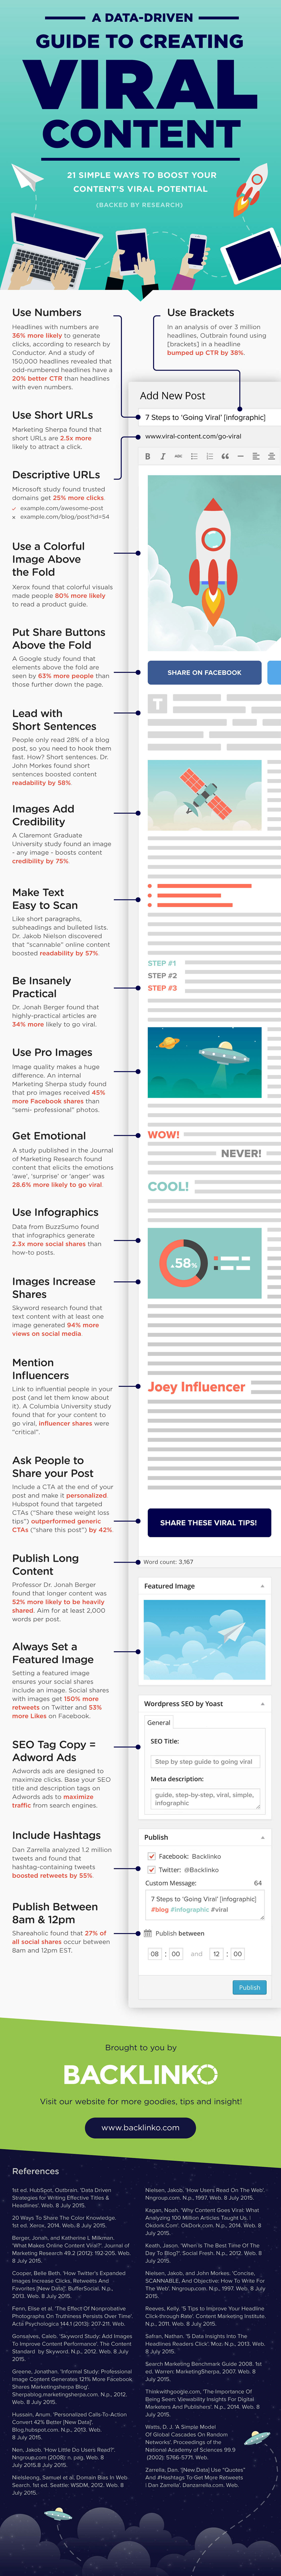 How to Make a Blog post Go Viral Infographic